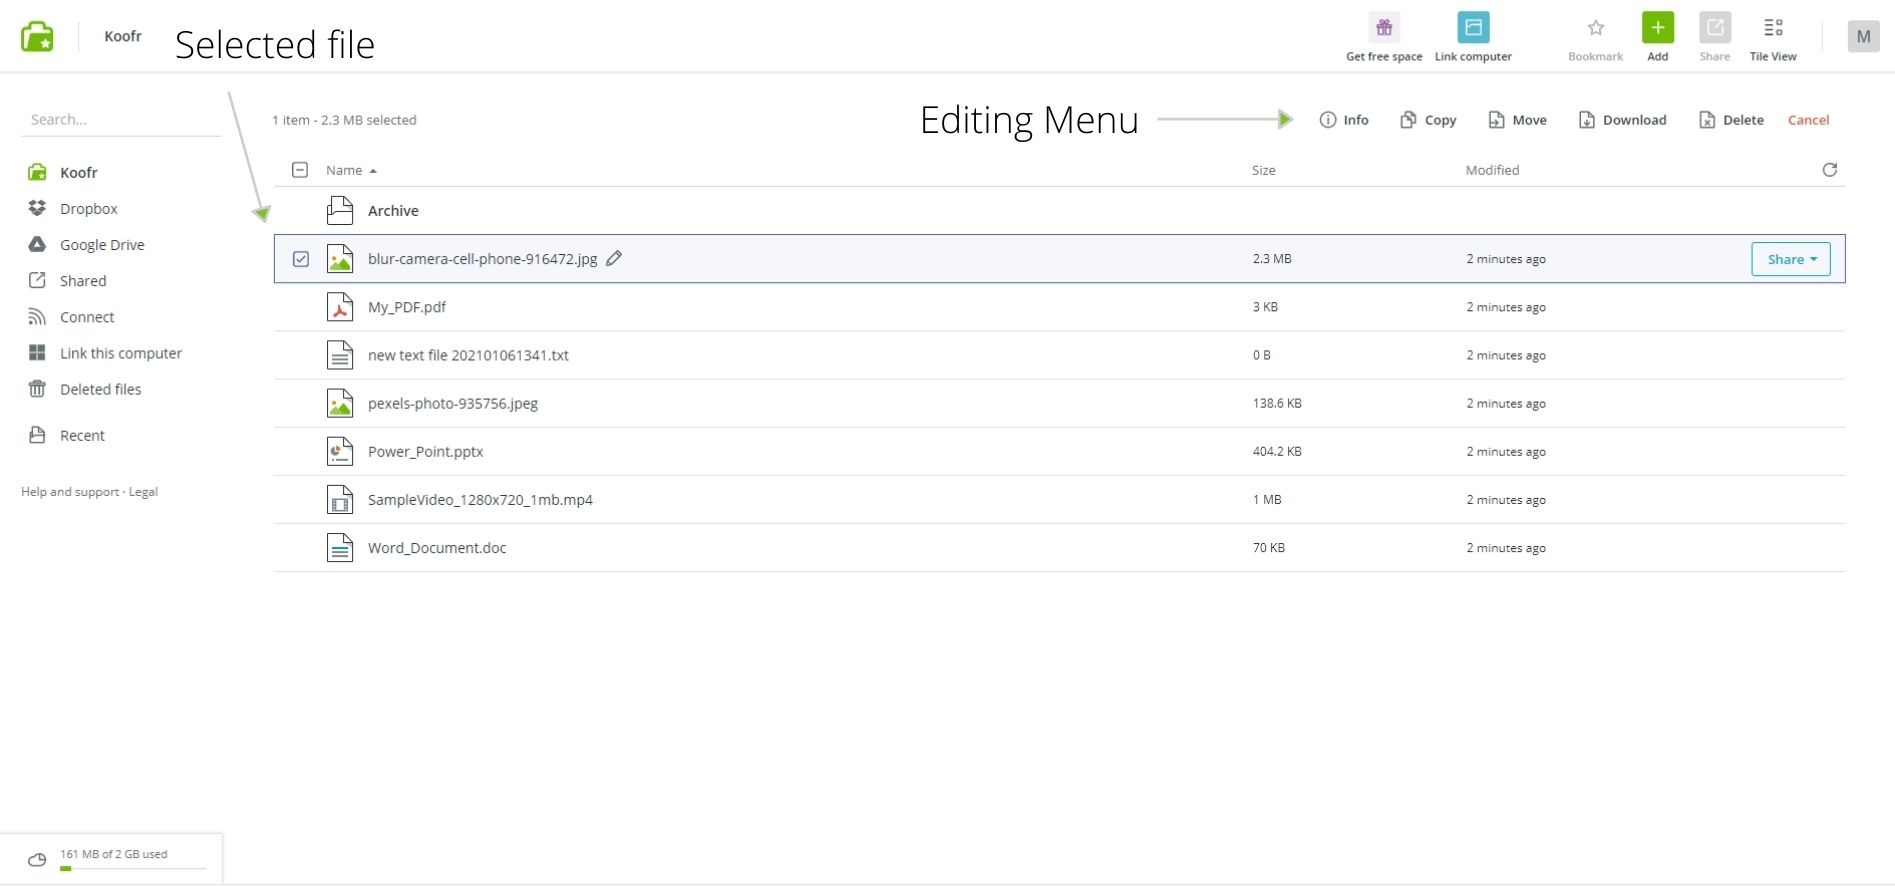 Selecting a file enables several options in the Editing Menu.